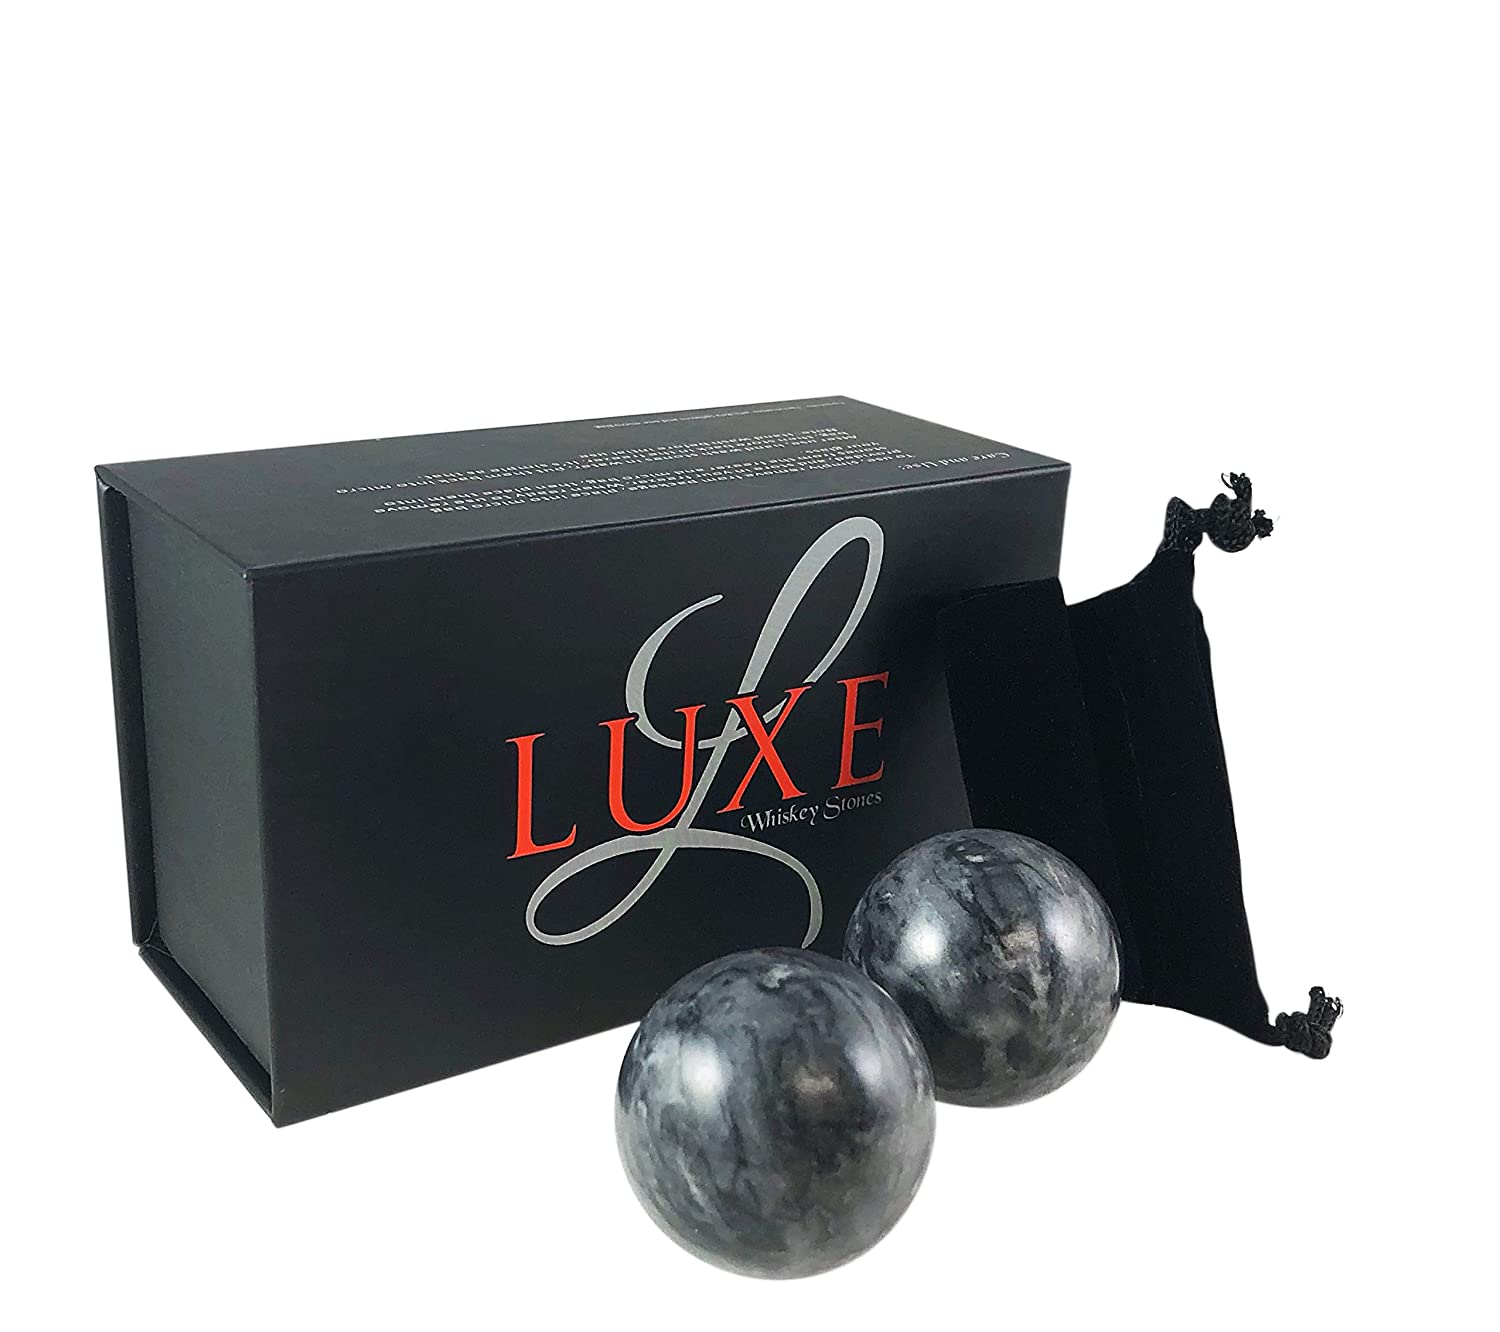 Luxe Whiskey Stones - Set of 2 Marble Chilling Spheres in Gift Box with Velvet Storage Bag